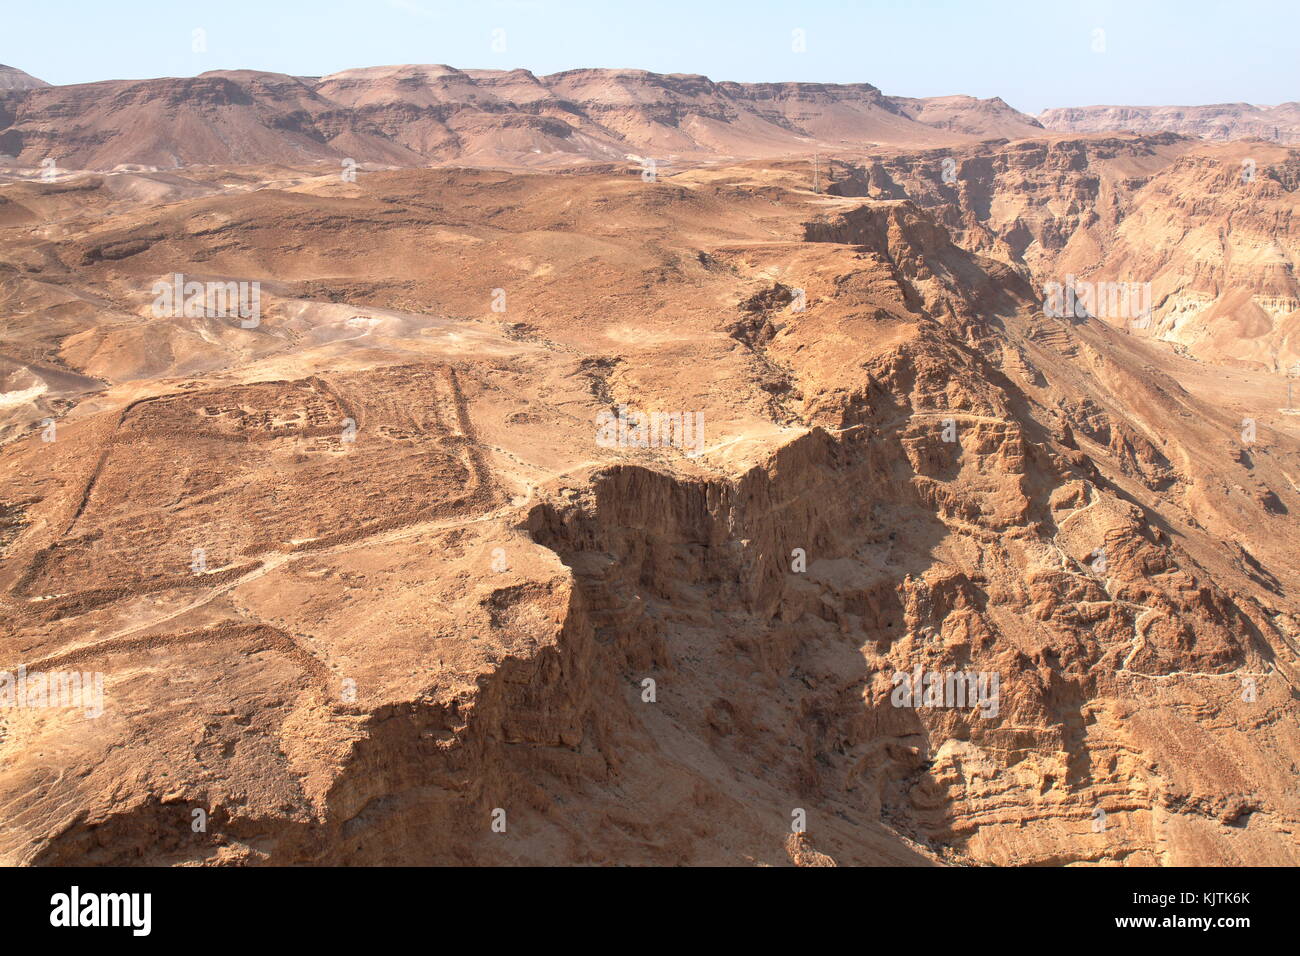 View on the desert from Masada - Roman camp vestiges - Israel Stock Photo